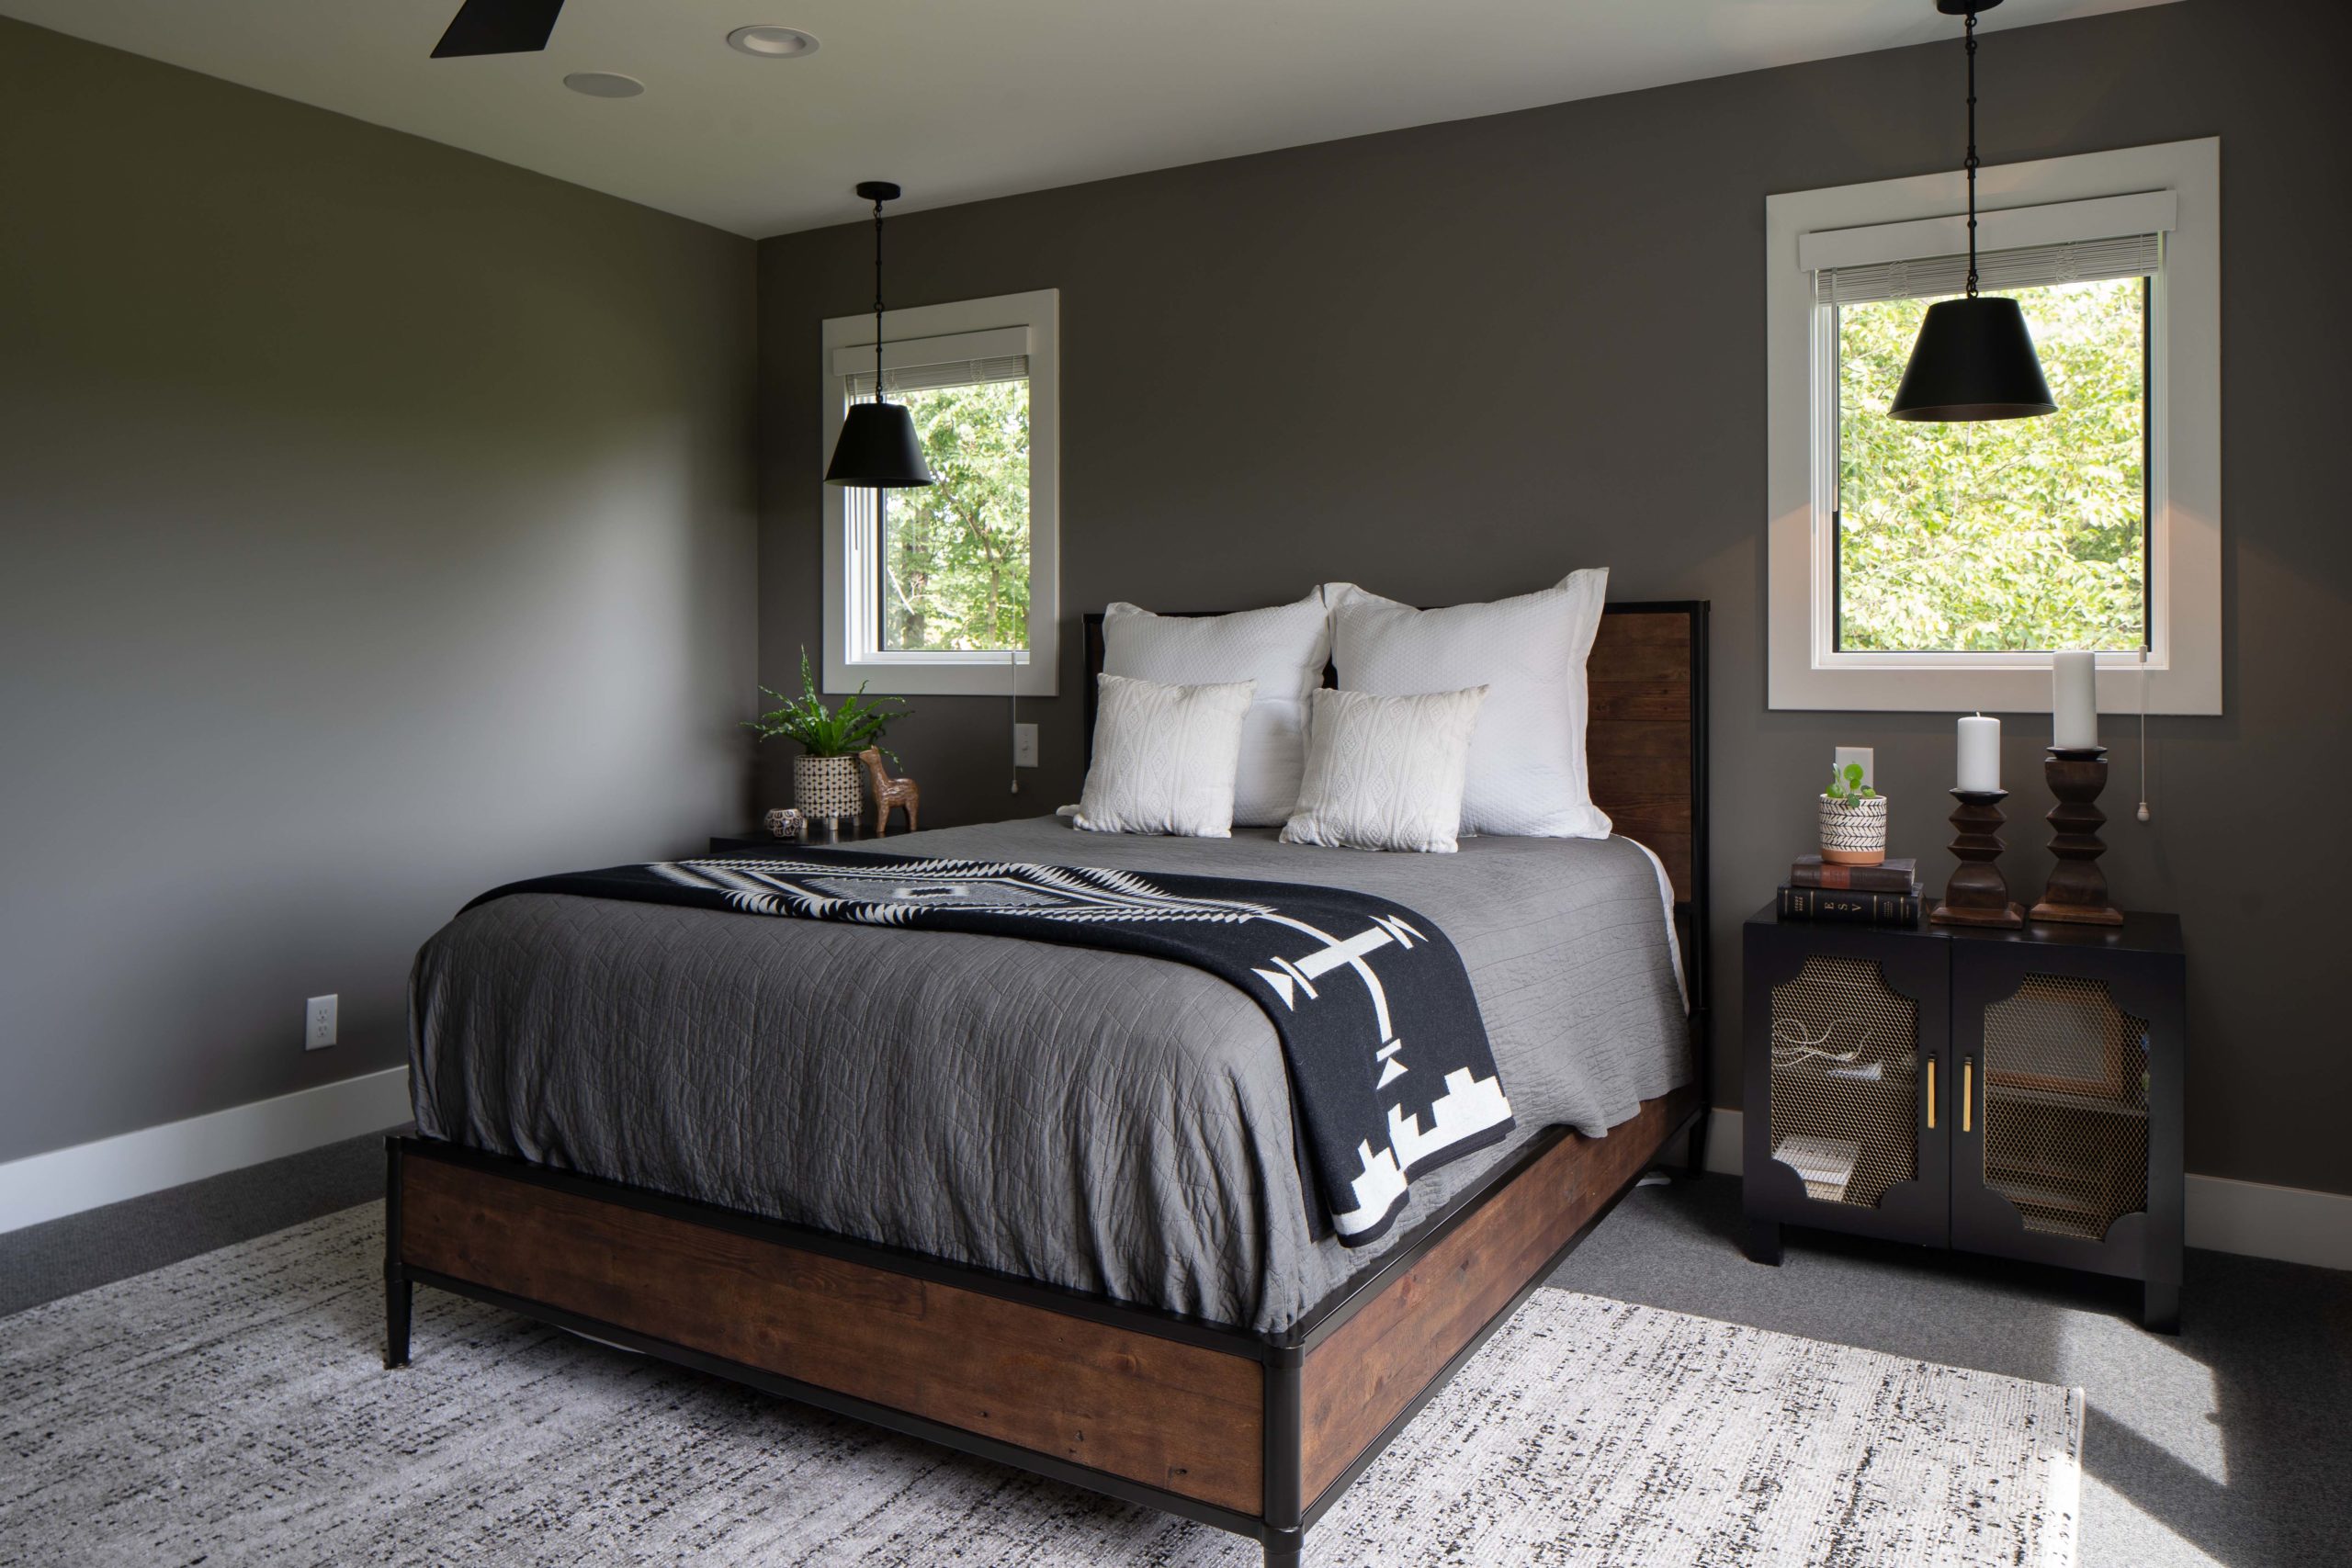 A bedroom with gray walls and a bed from the portfolio.